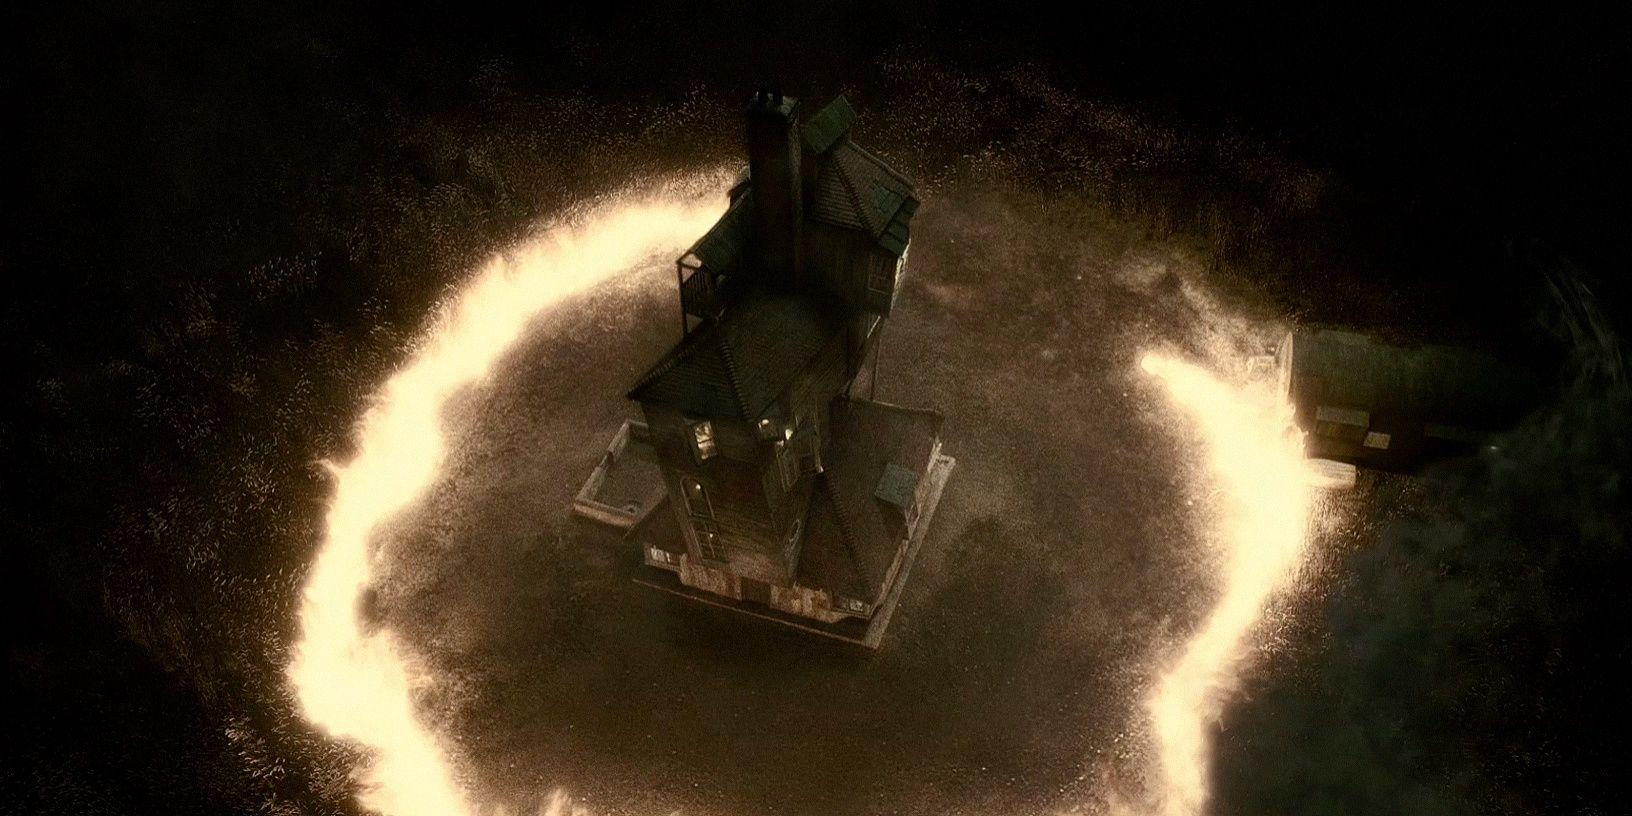 An image of the Weasley Burrow on fire in Harry Potter and the Half-Blood Prince